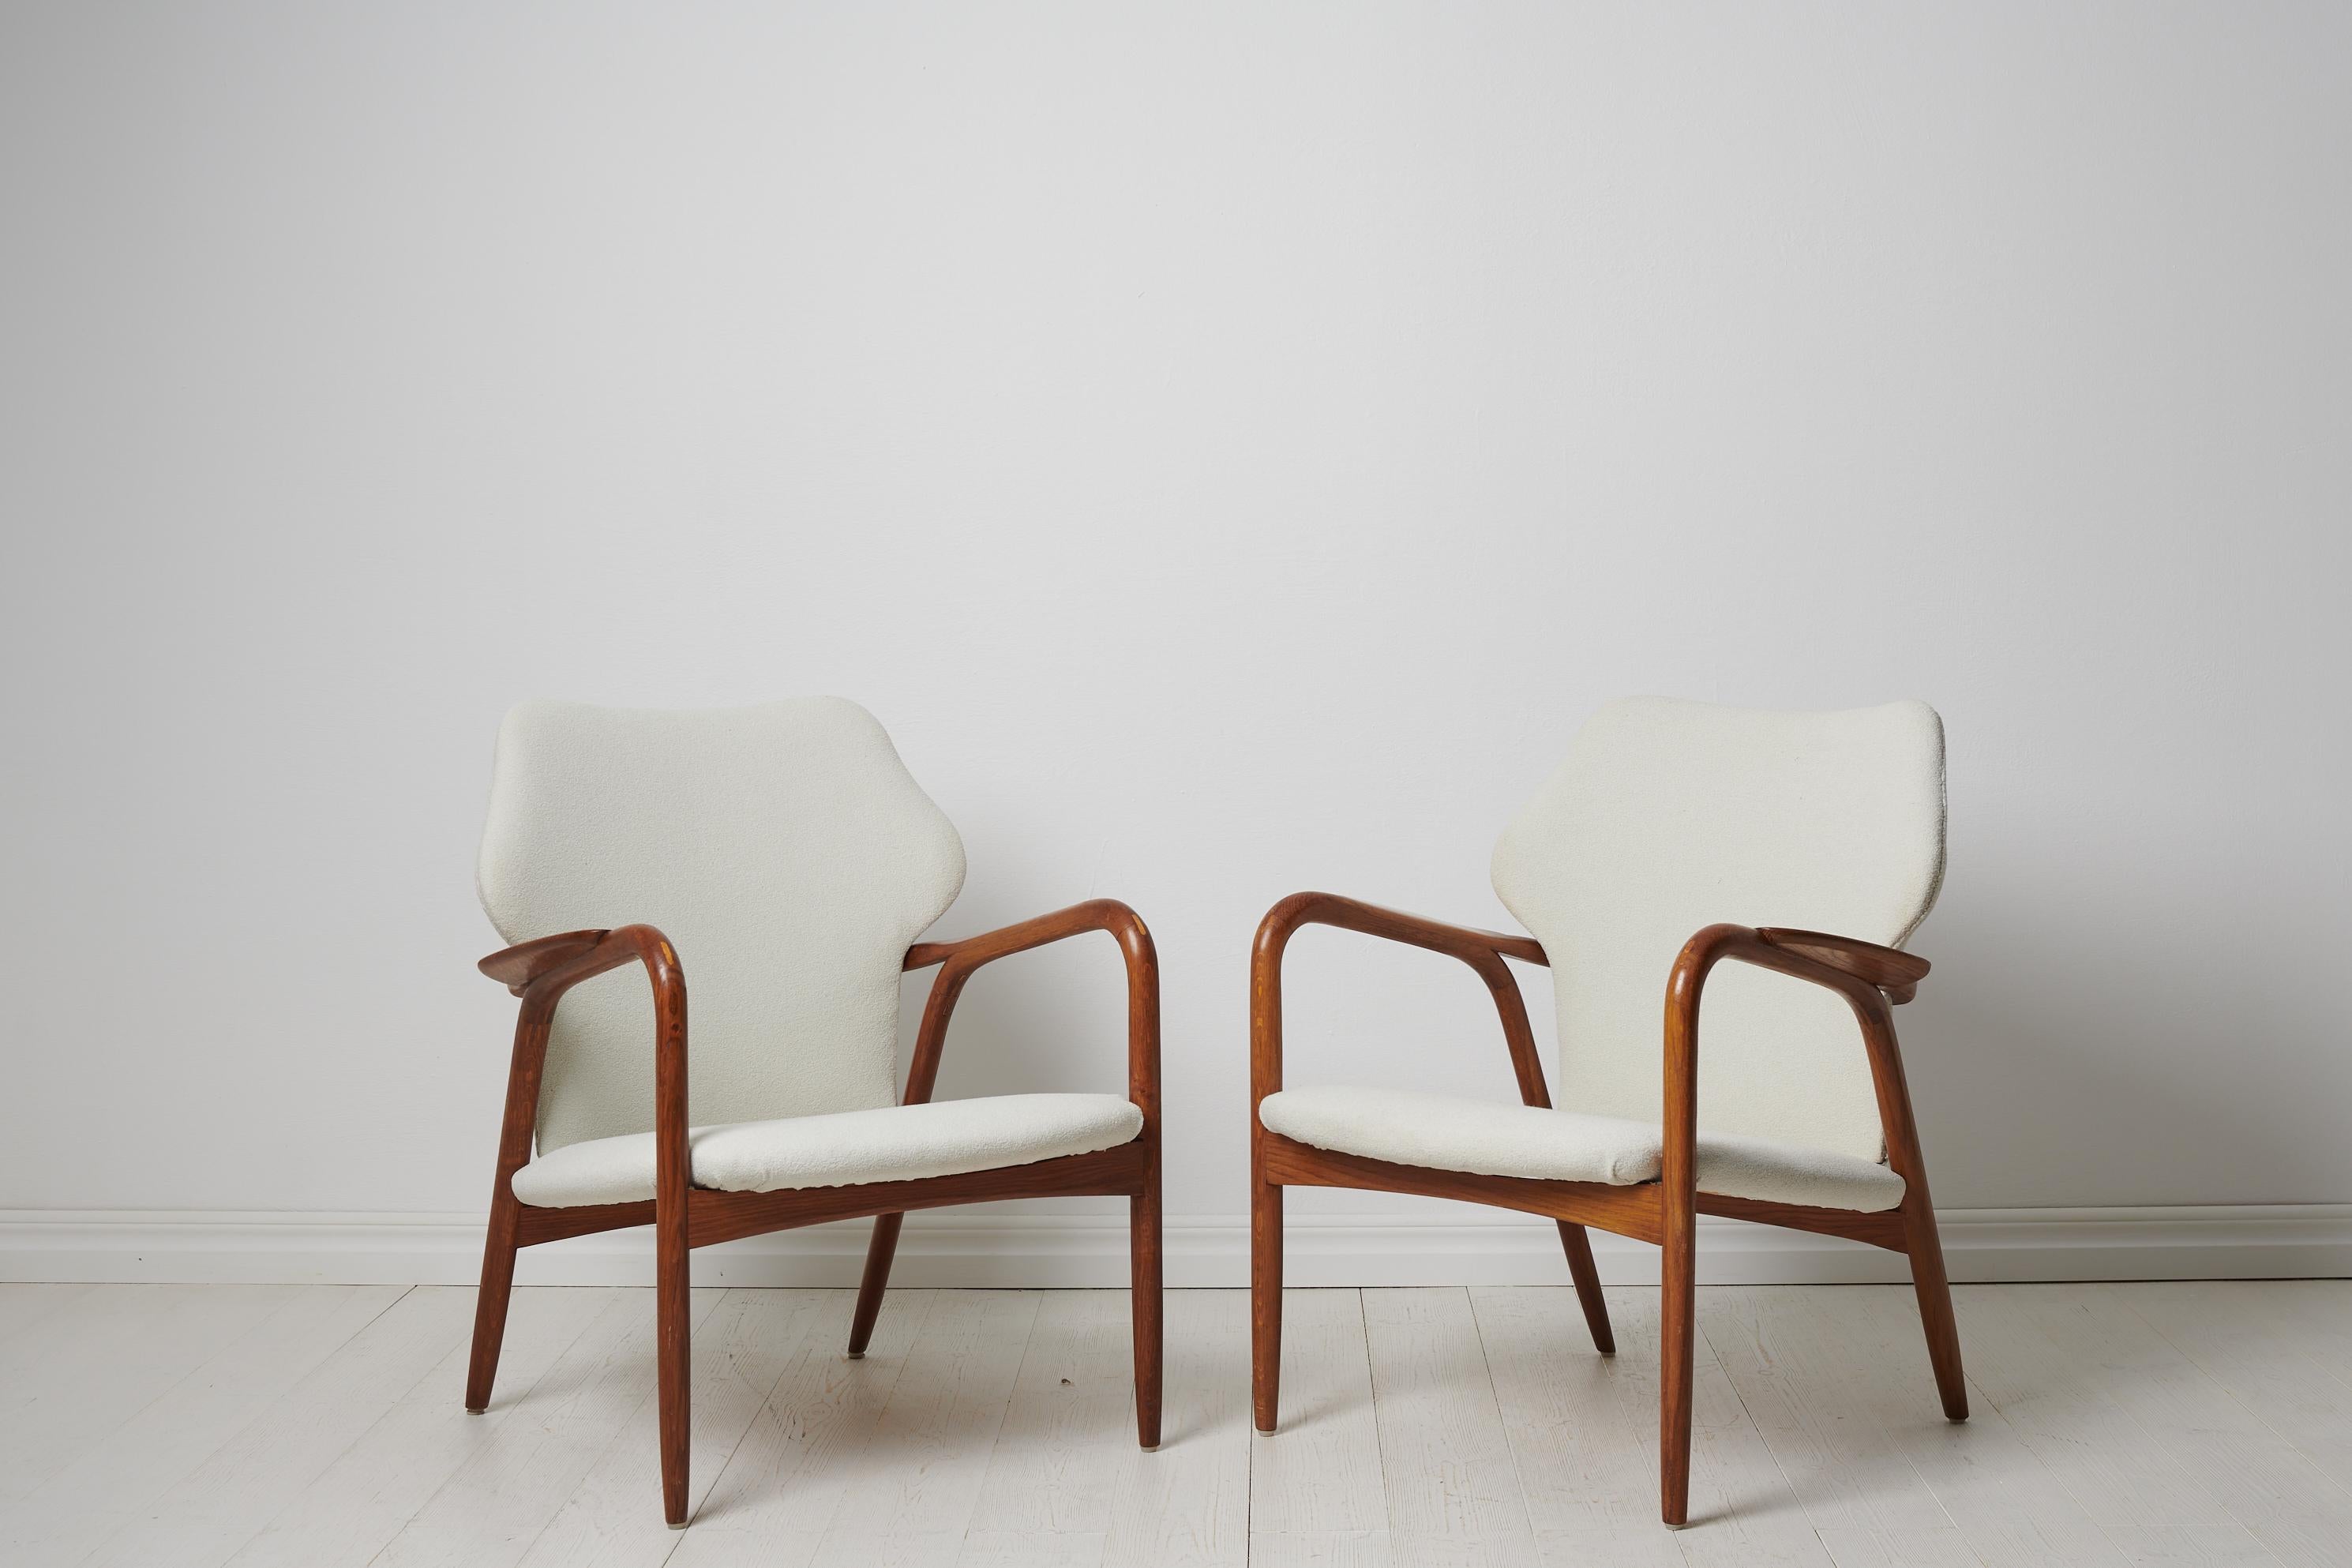 Swedish modern white armchairs made in Sweden around the mid 20th century, 1950 to 1960s. The pair is renovated with newly upholstered seats. The frame is made in stained oak.